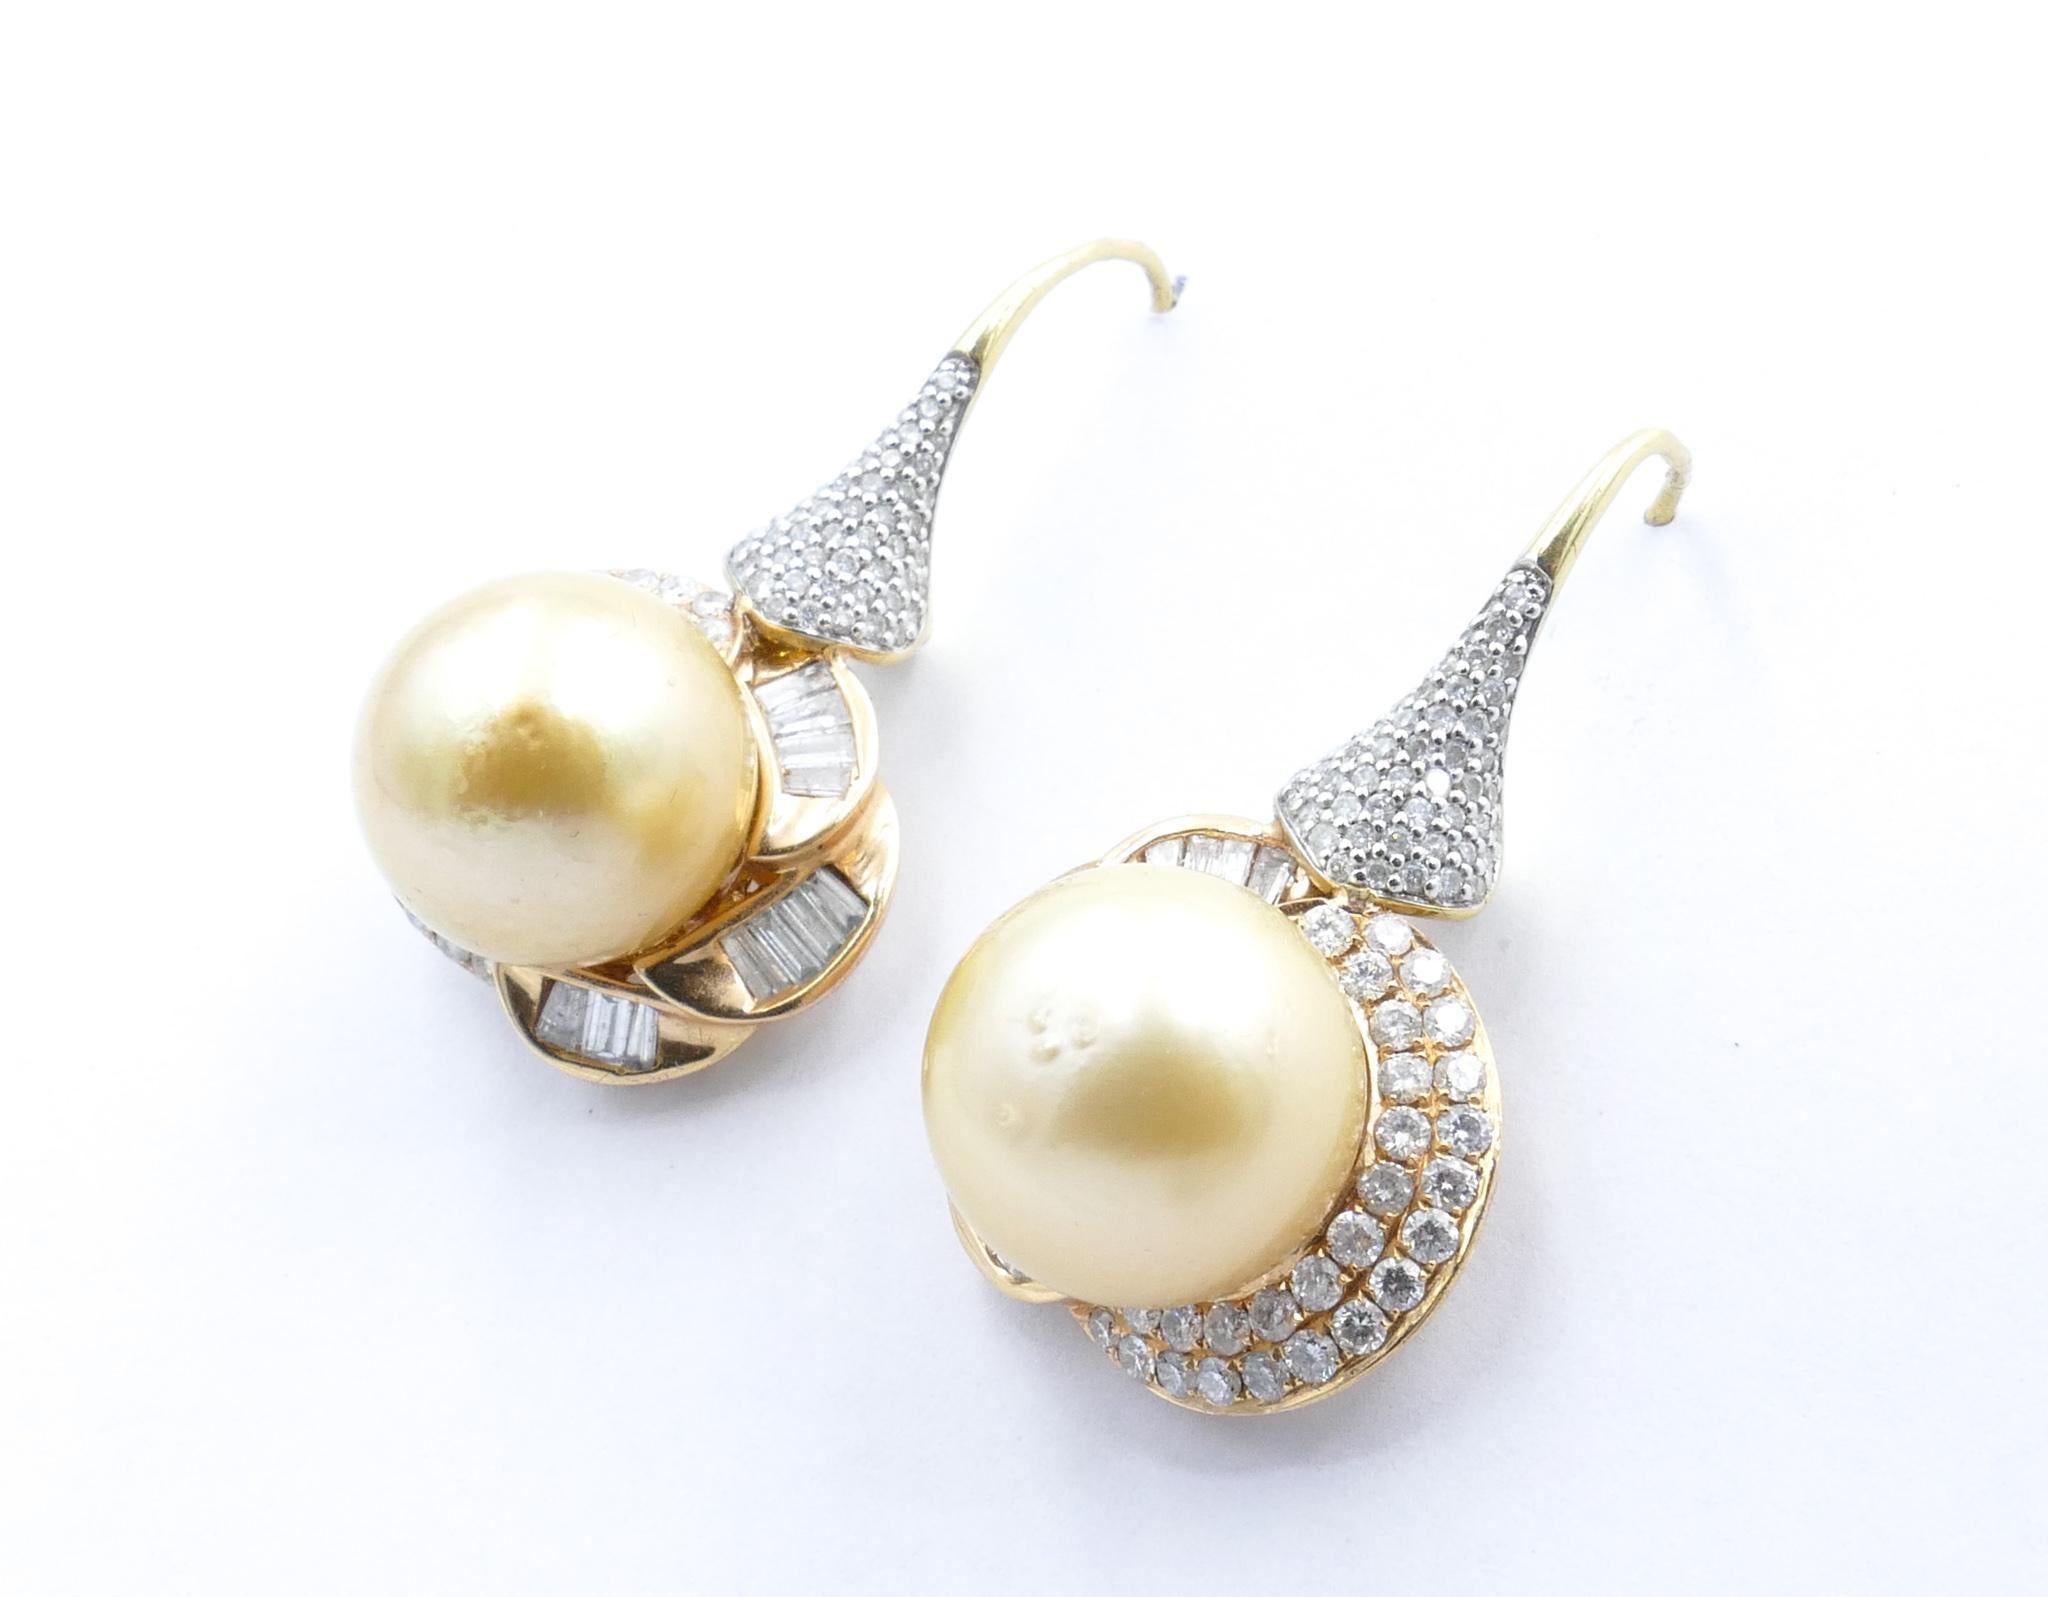 These beautiful Golden Pearl Drop Earrings feature 2 X 13+mm South Sea Pearls surrounded by 134 Brilliant Cut Diamonds, Bead/Pave Set, Colour G/I, Clarity VS1-VS2.
As well there are 24 tapered Baguette Cut Diamonds, channel set, Colour G/I, Clarity